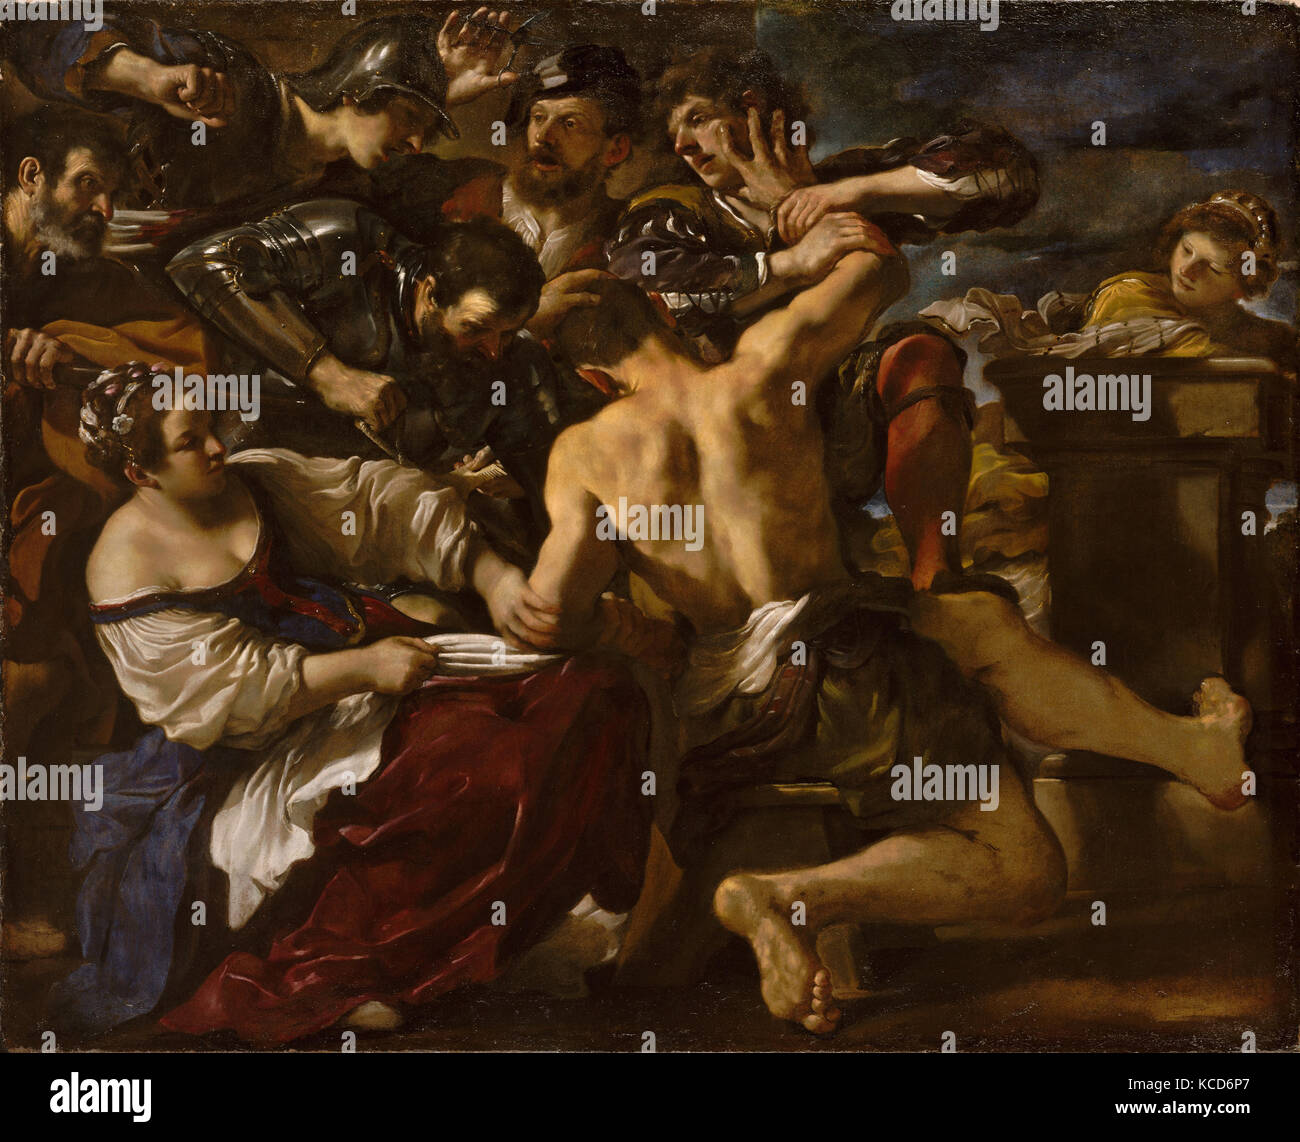 Samson Captured by the Philistines, 1619, Oil on canvas, 75 1/4 x 93 1/4 in. (191.1 x 236.9 cm), Paintings, Guercino (Giovanni Stock Photo